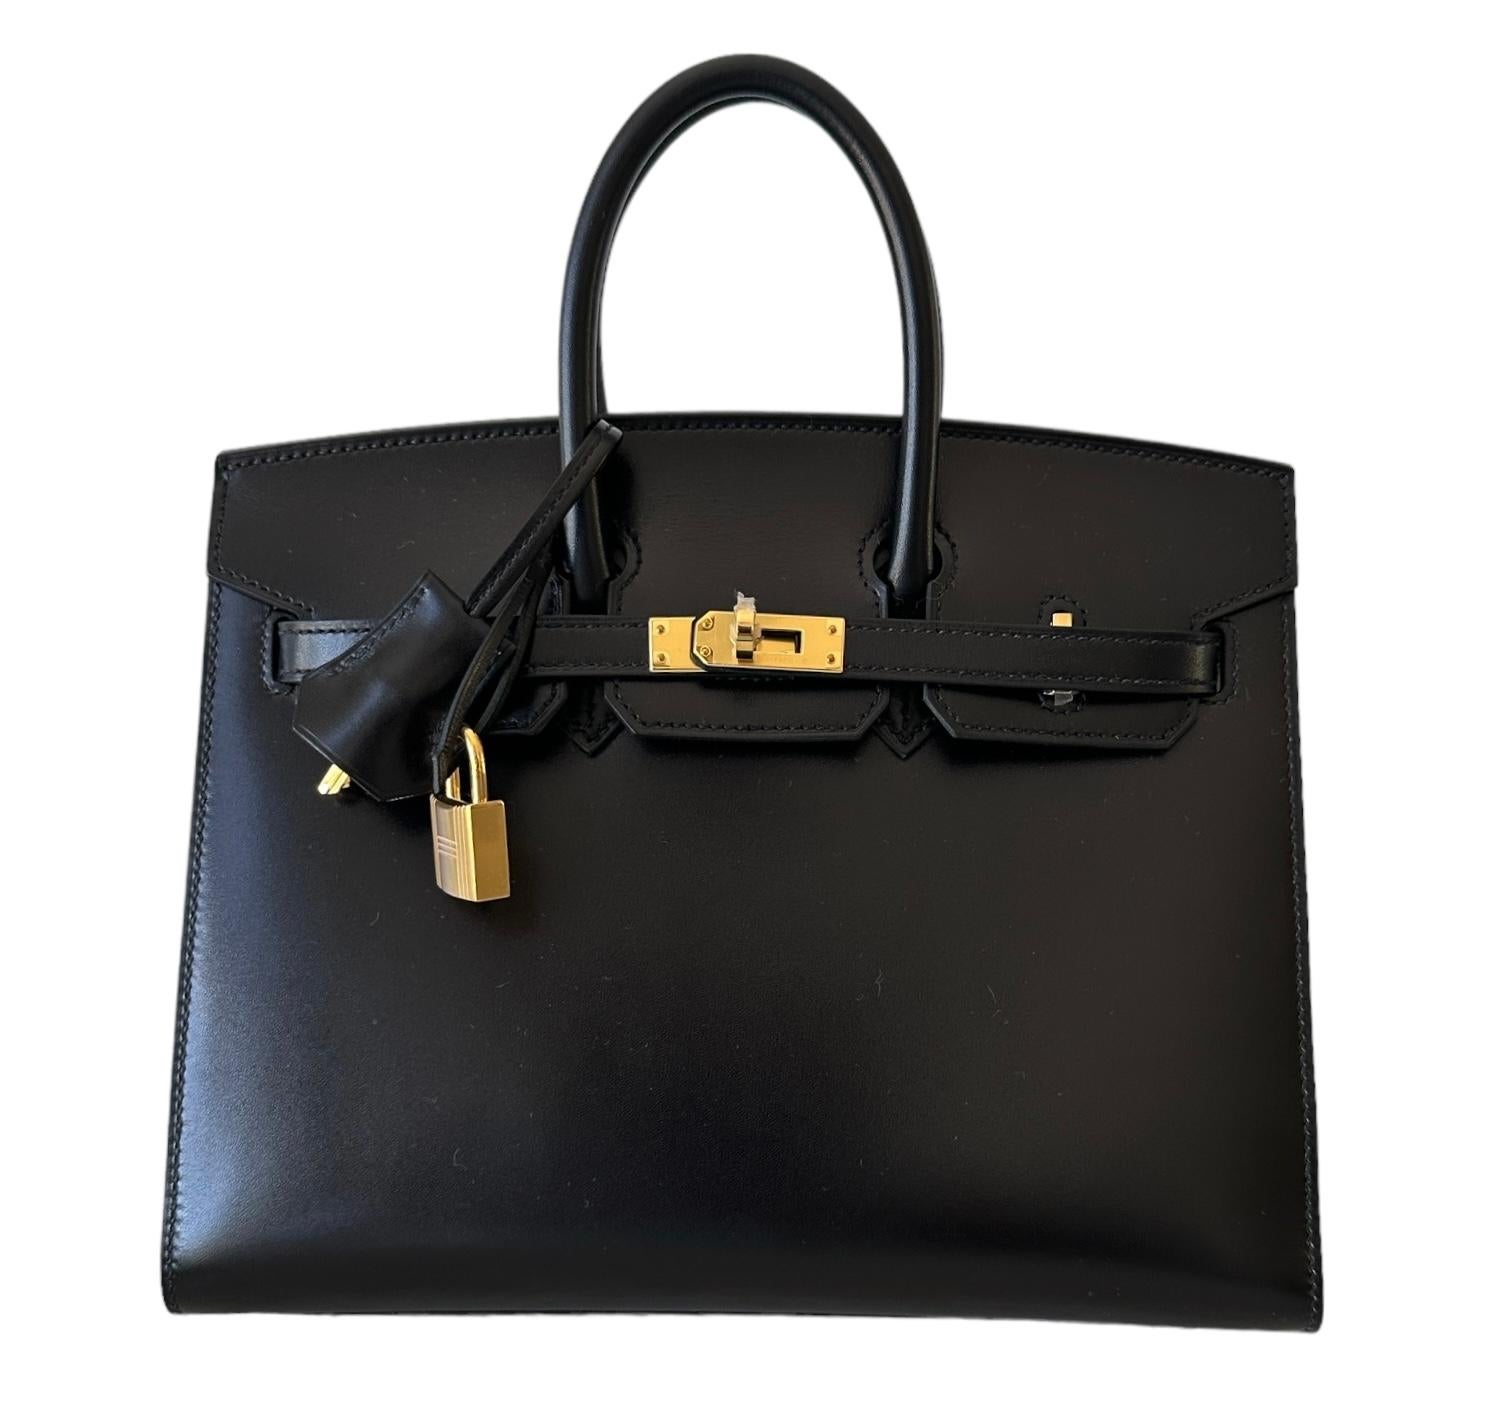 Hermes Black Birkin Bag Sellier 25 Black Rare Box Leather New  In New Condition For Sale In West Chester, PA